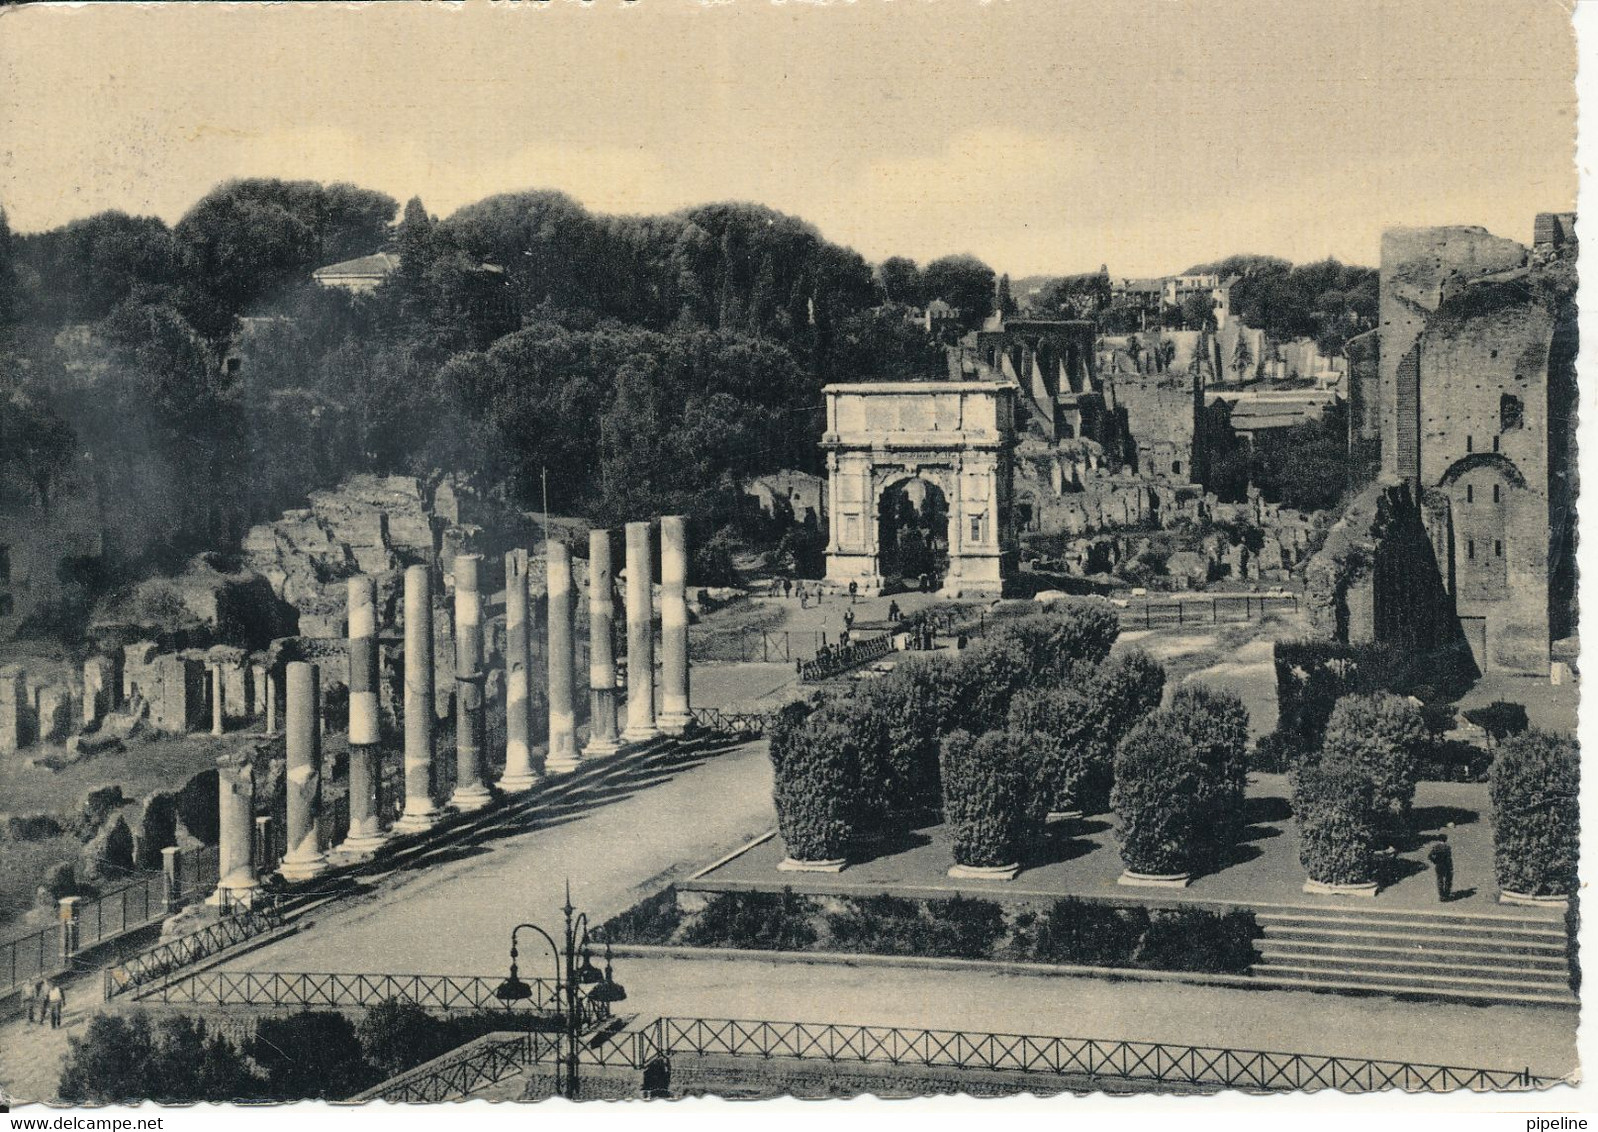 Italy Postcard Sent To Germany 16-2-1950 Arch Of Titus - Parques & Jardines